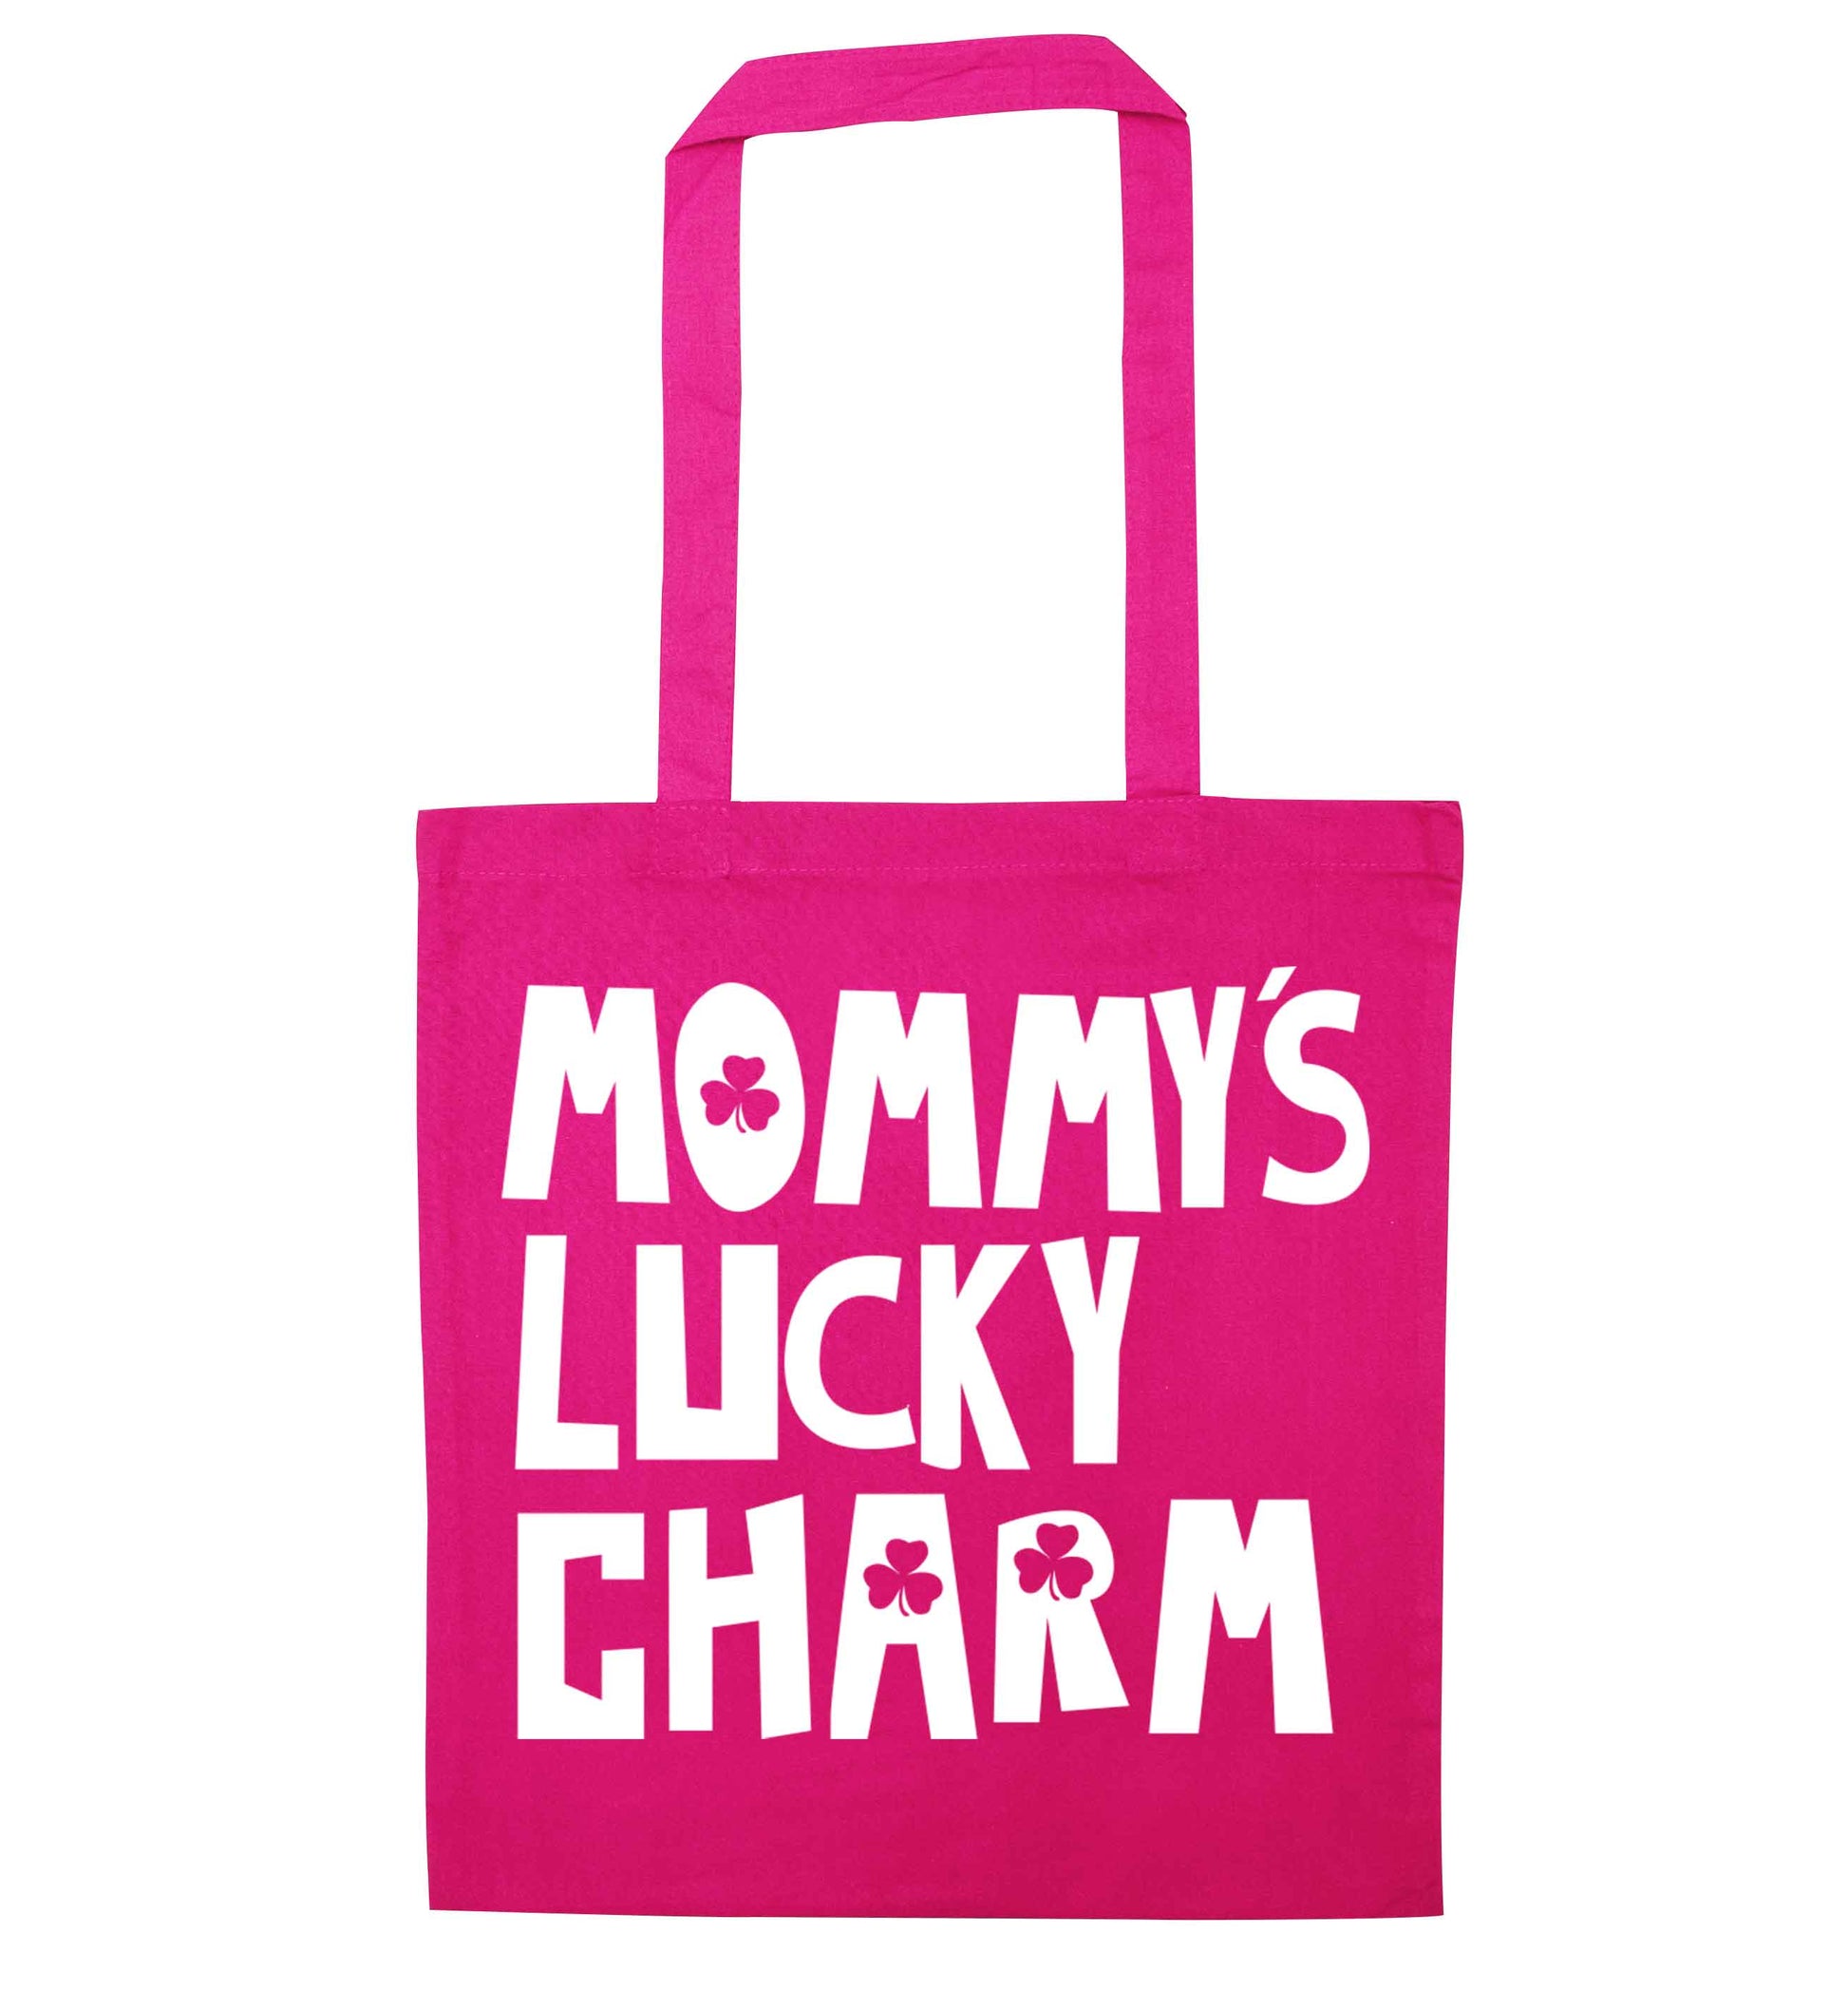 Mommy's lucky charm pink tote bag